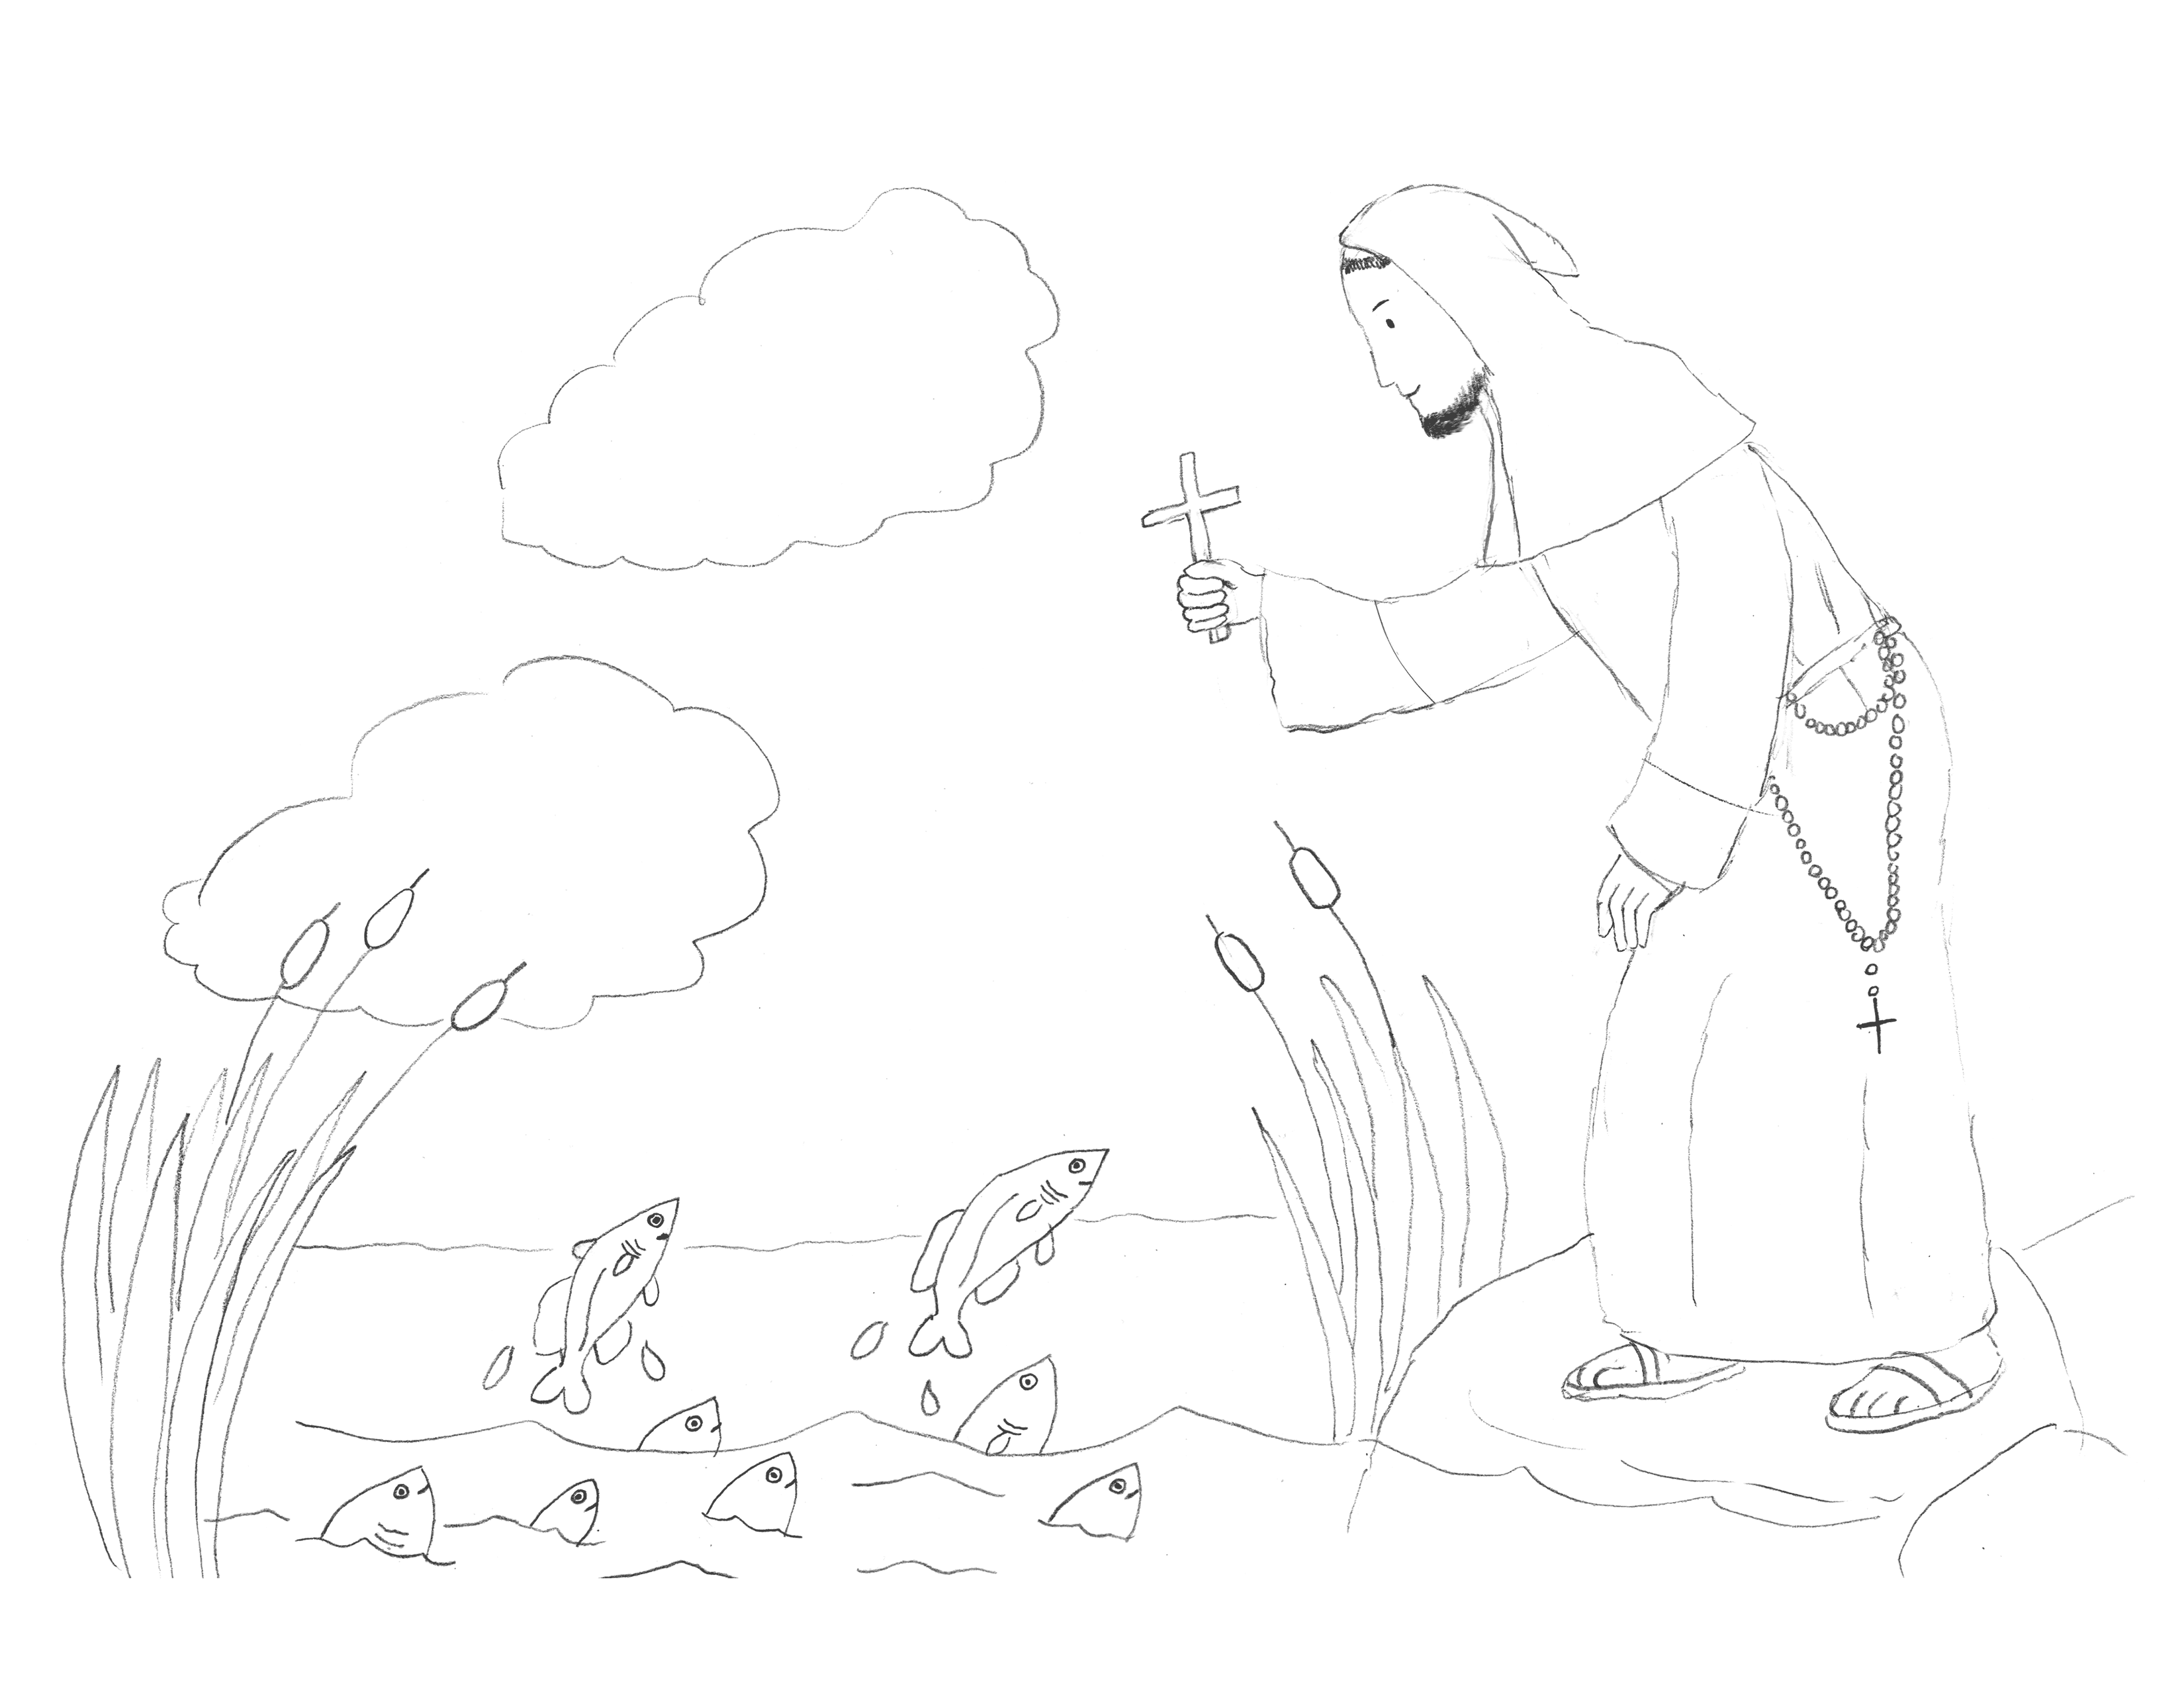 St anthony preaching to the fish coloring page â